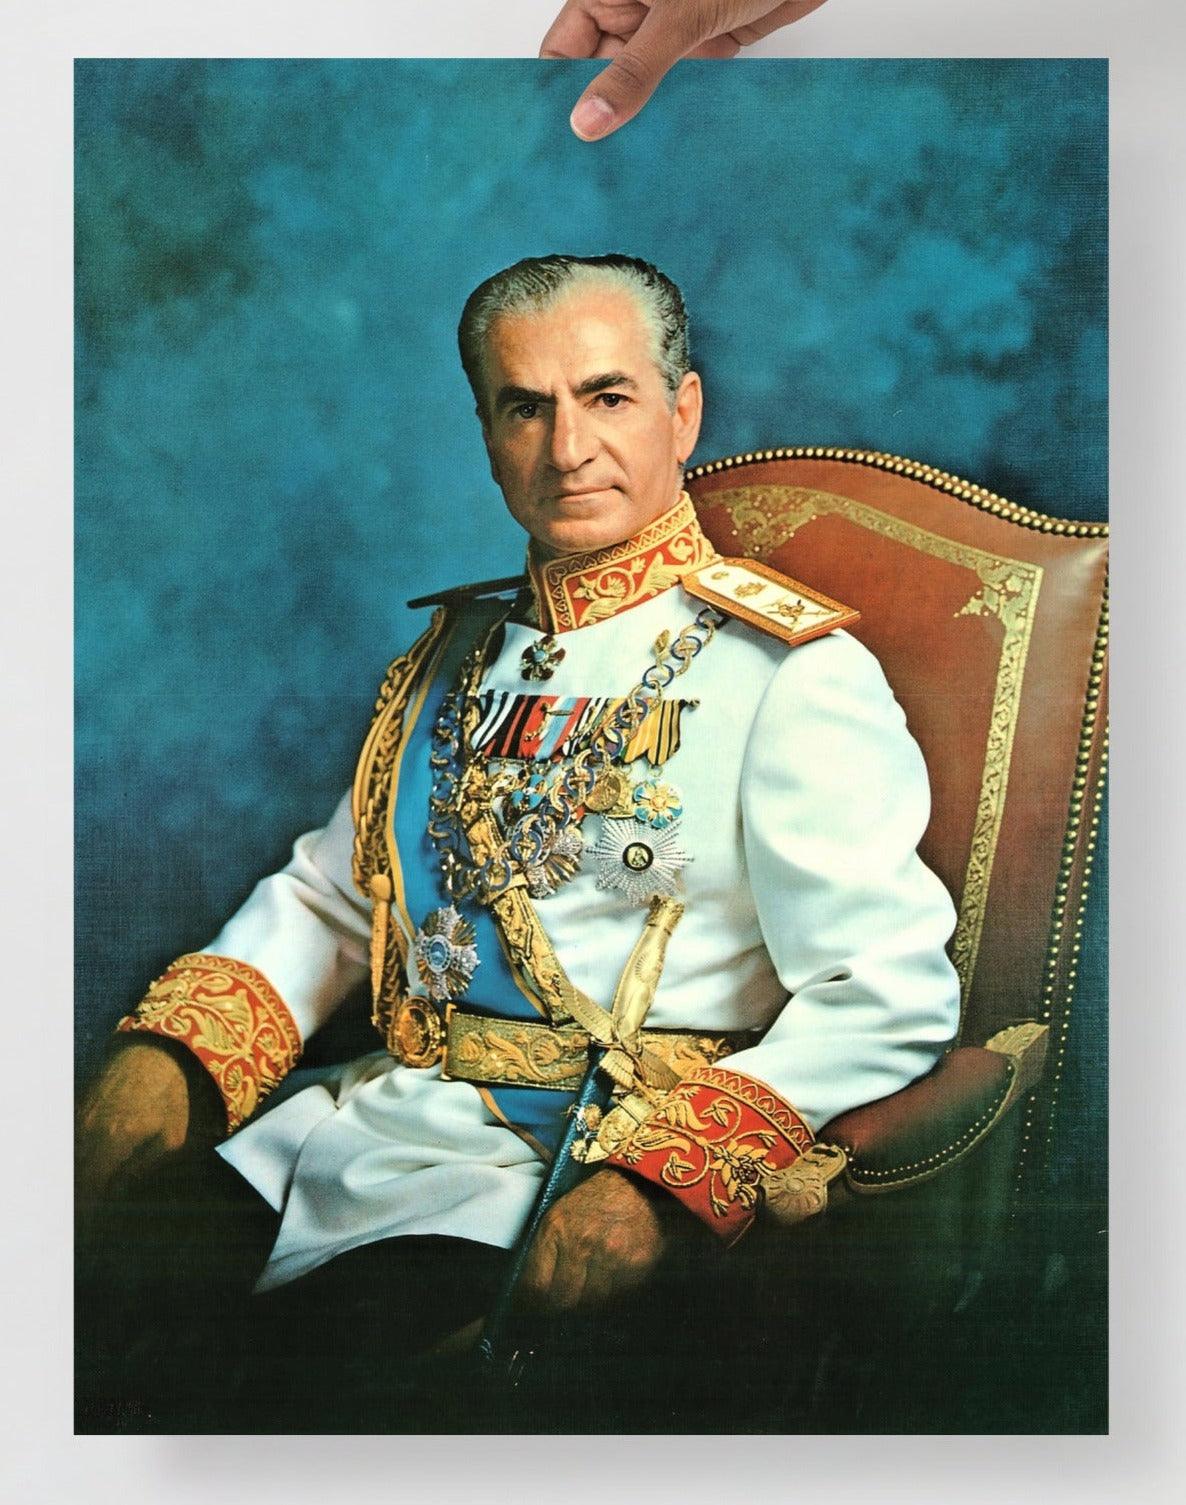 A Mohammad Reza Pahlavi poster on a plain backdrop in size 18x24”.